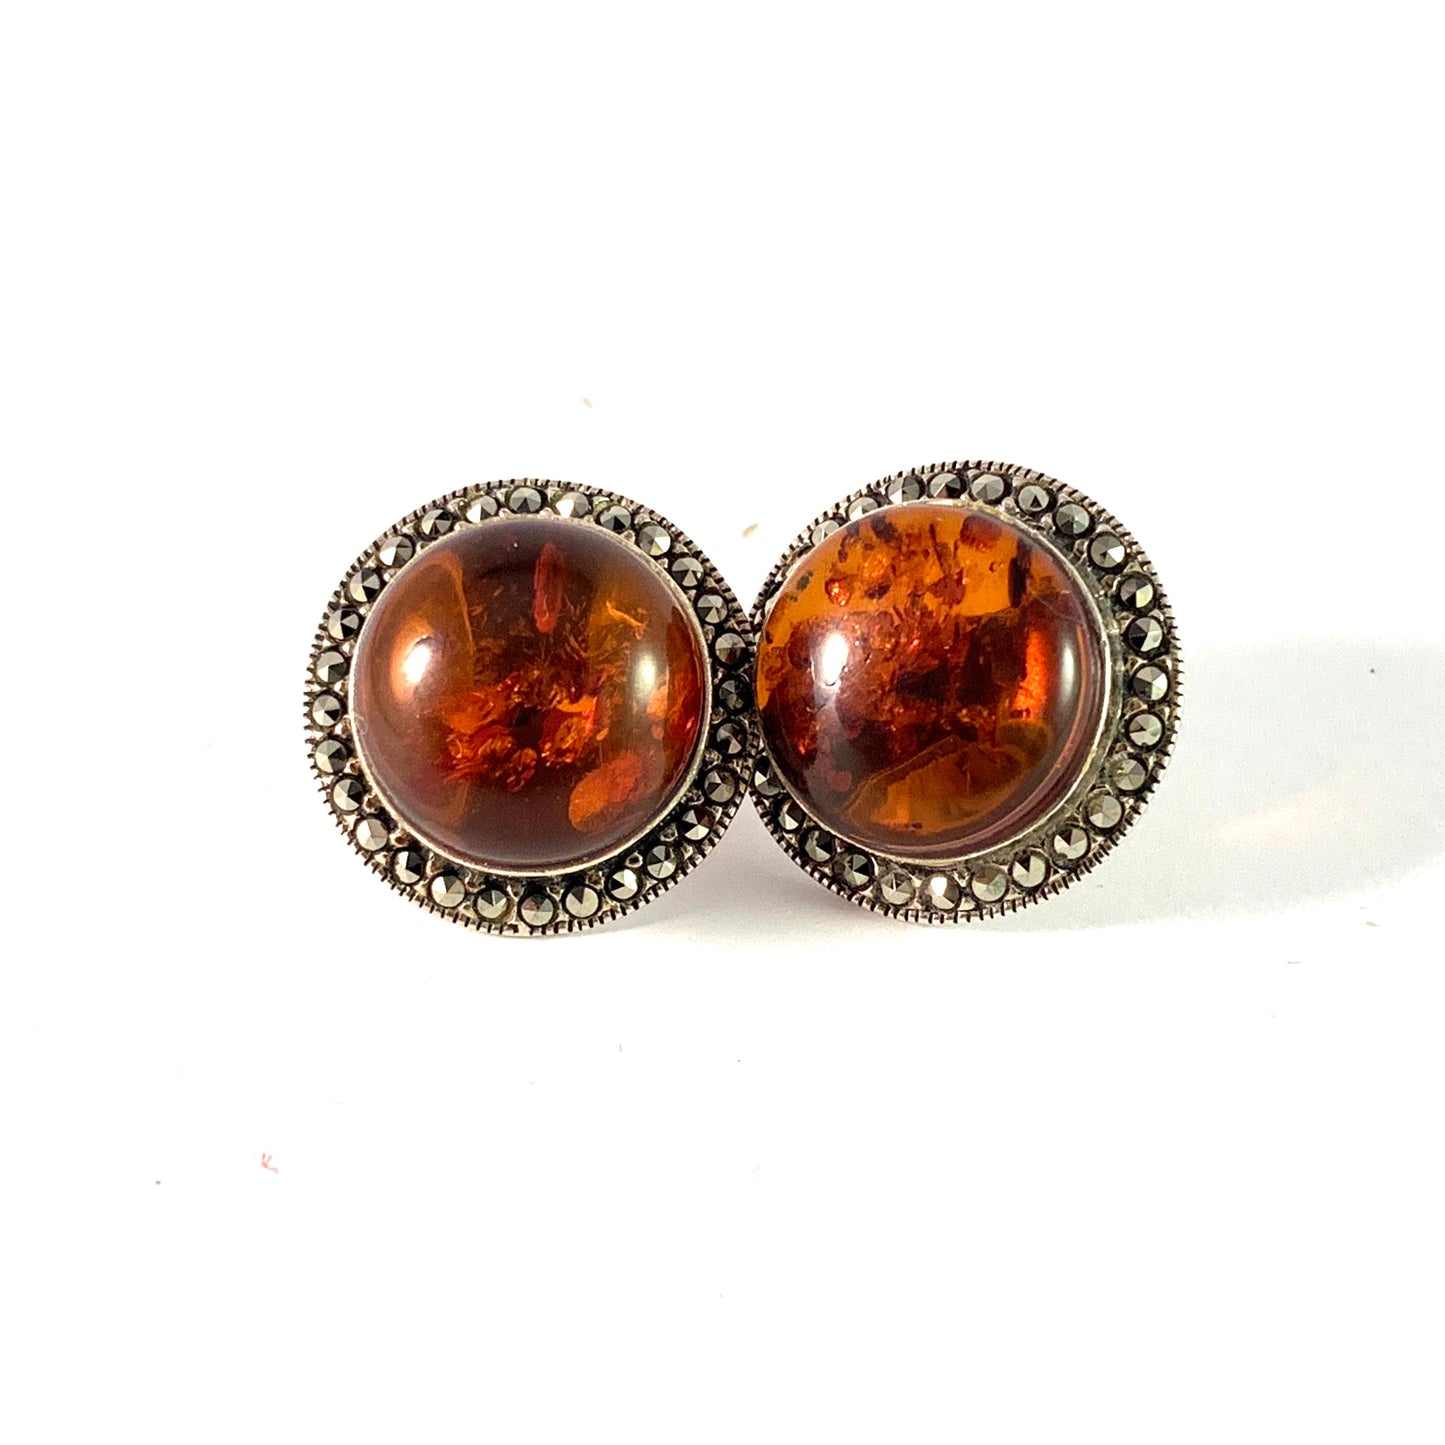 Maker TH, North Continental Europe Vintage Sterling Silver Amber Marcasite Large Stud Earrings.